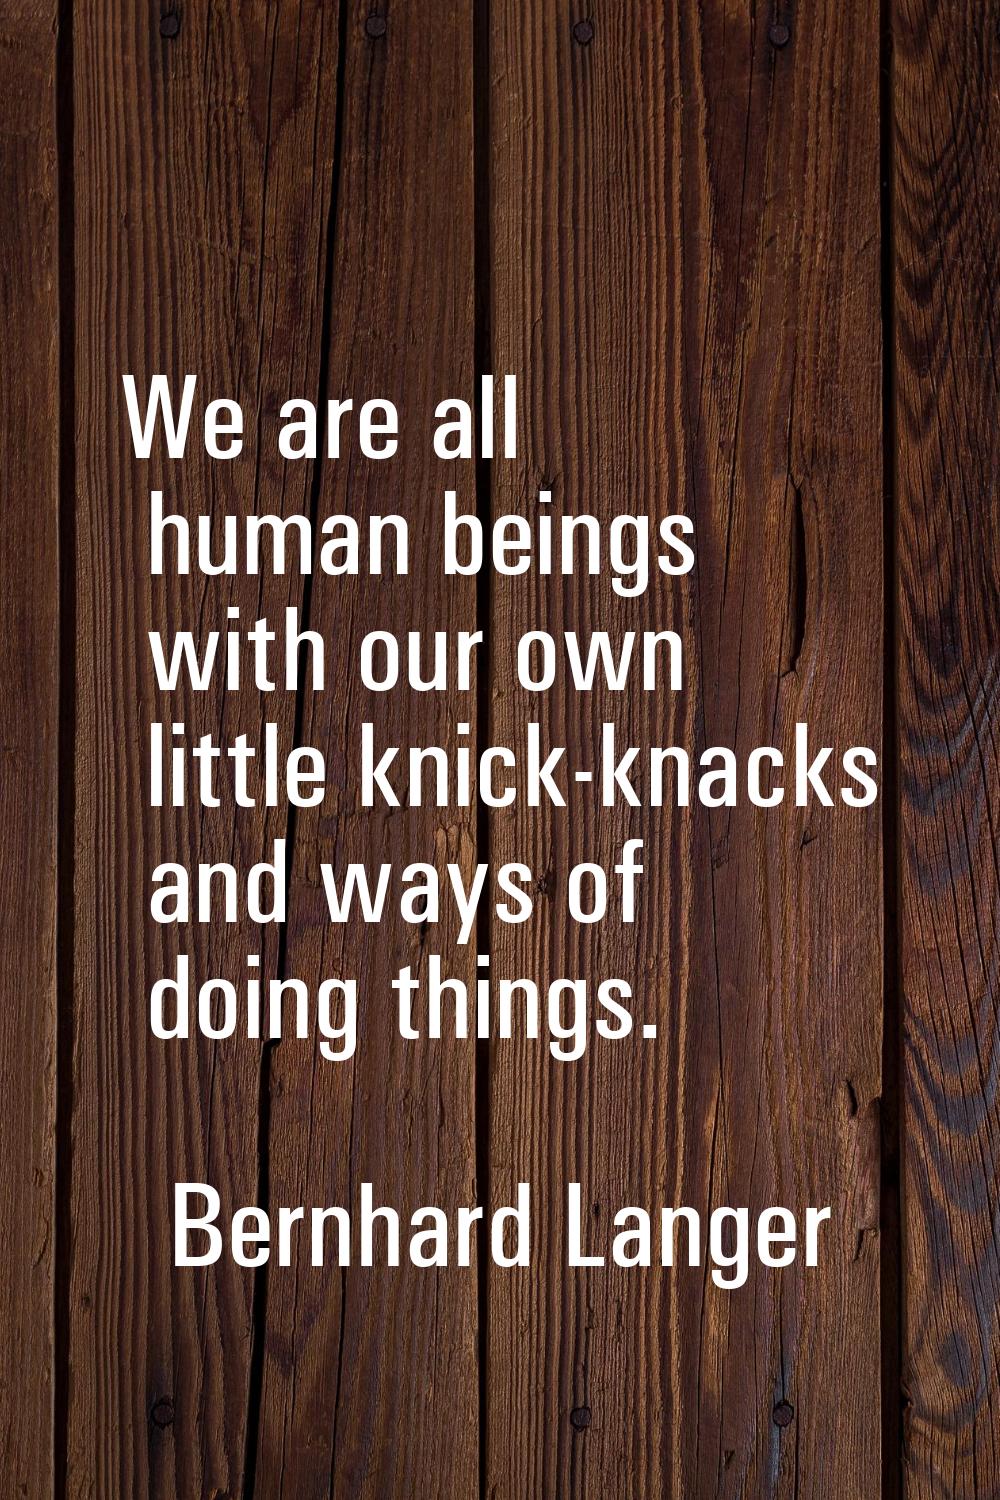 We are all human beings with our own little knick-knacks and ways of doing things.